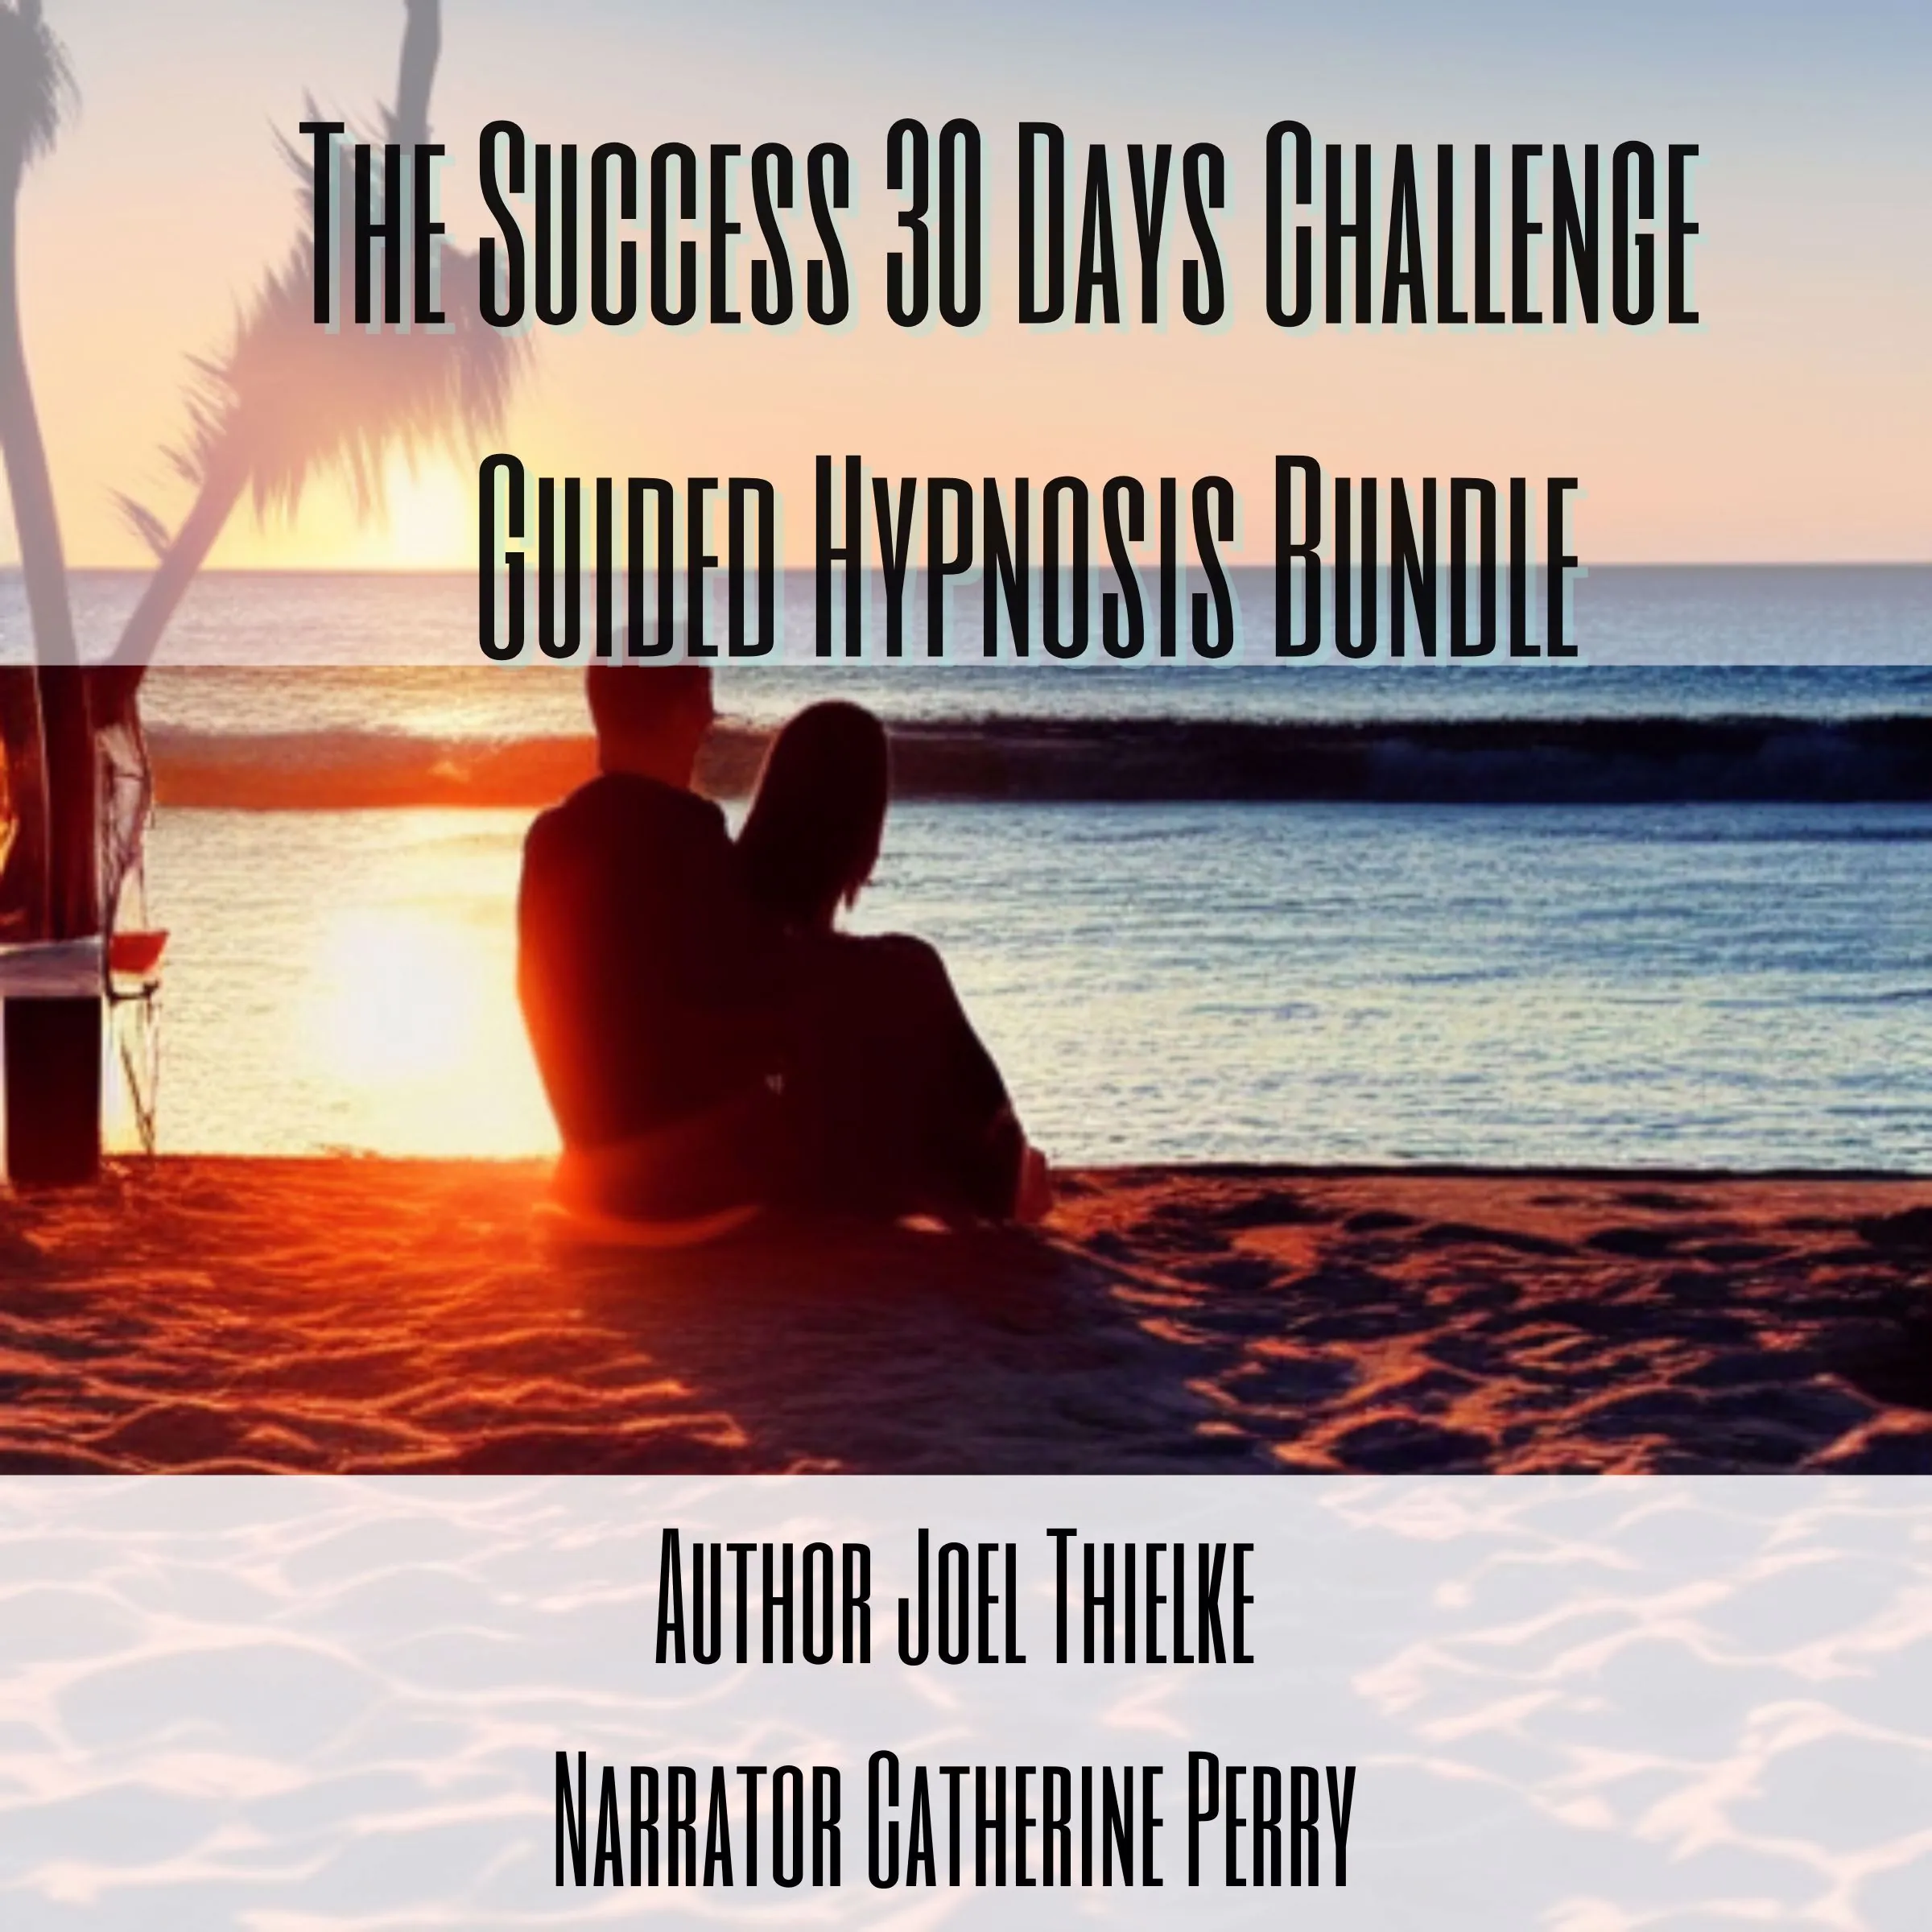 The Success 30 Days Challenge  Guided Hypnosis Bundle by Joel Thielke Audiobook